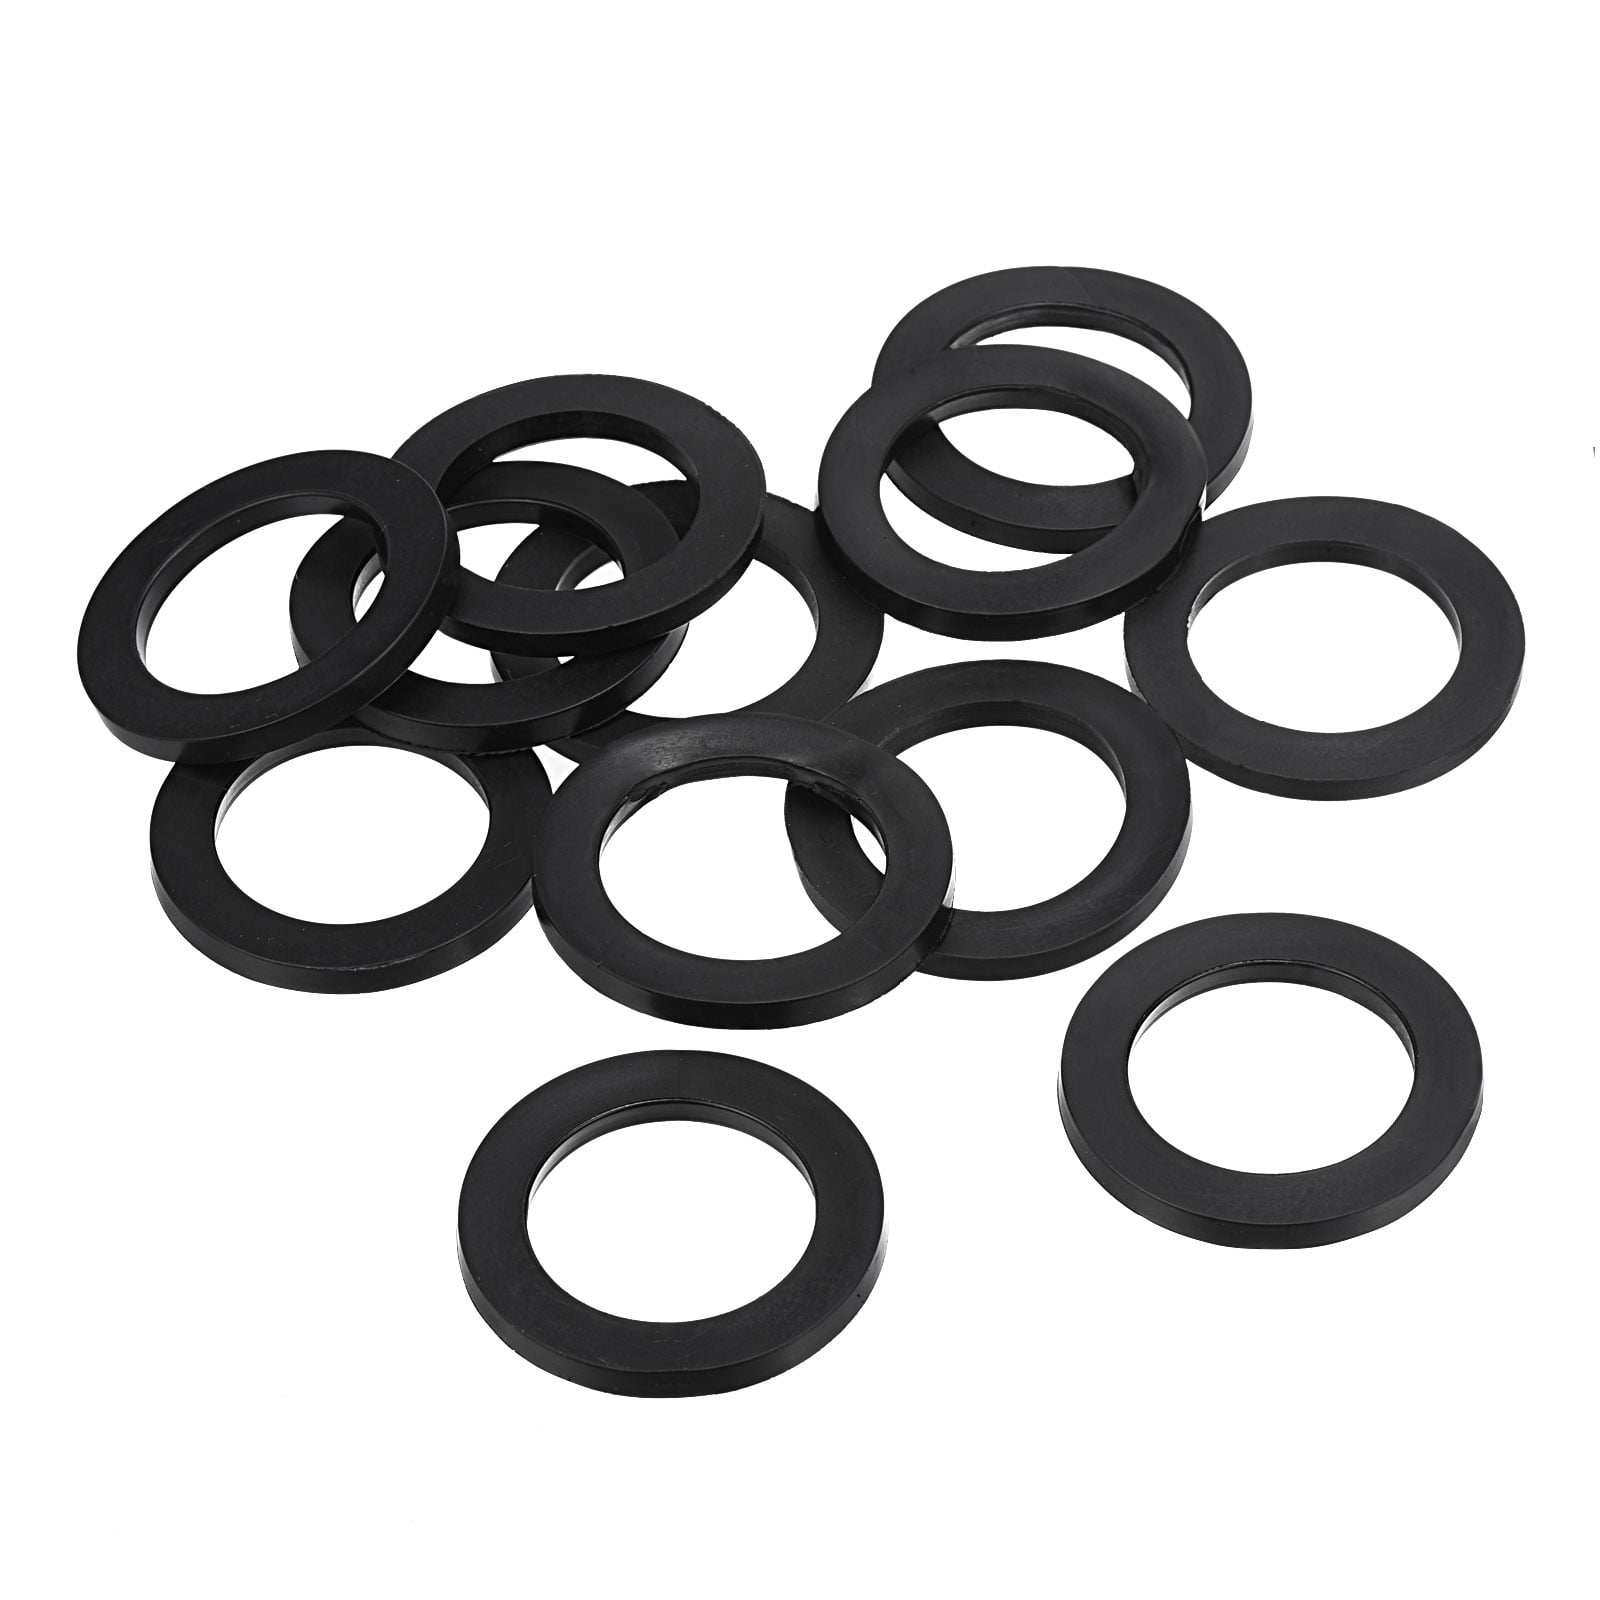 Amazon.com: MECCANIXITY Nitrile Rubber Flat Washer 3 Inch DN80 Gasket for  Wrench Type Quick Connector, Black Pack of 5 : Industrial & Scientific